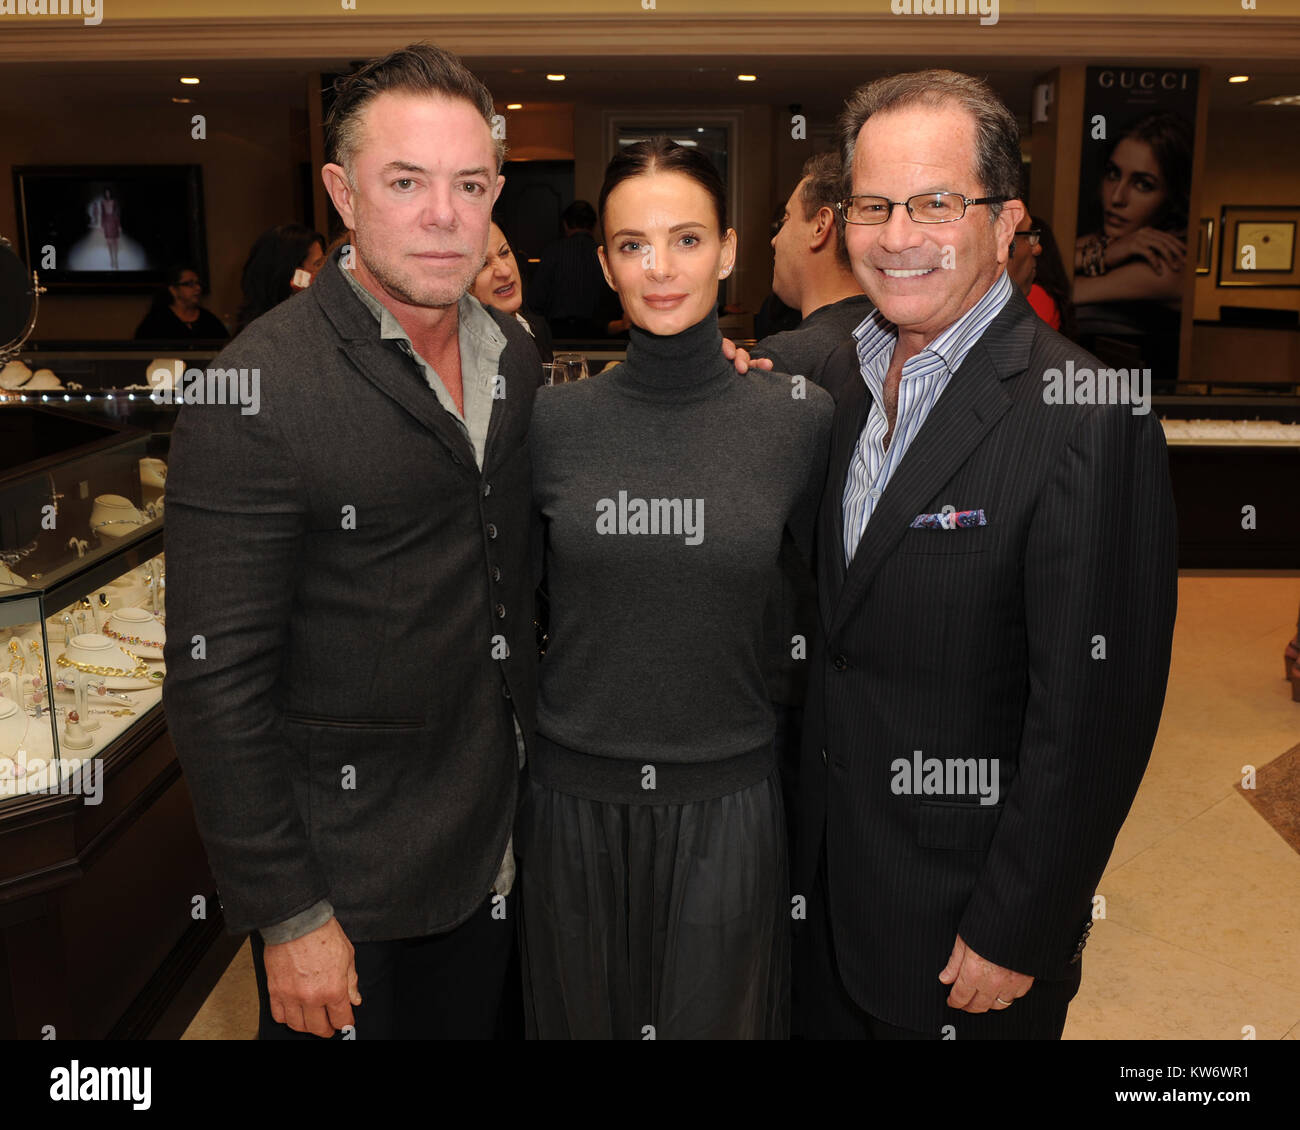 FORT LAUDERDALE FL - DECEMBER 11: Sharif Malik, Gabrielle Anwar, Marc  Levinson attend the Make A wish foundation gala sponsored by Gucci held at  Levinson Jewelers on December 11, 2014 in Fort